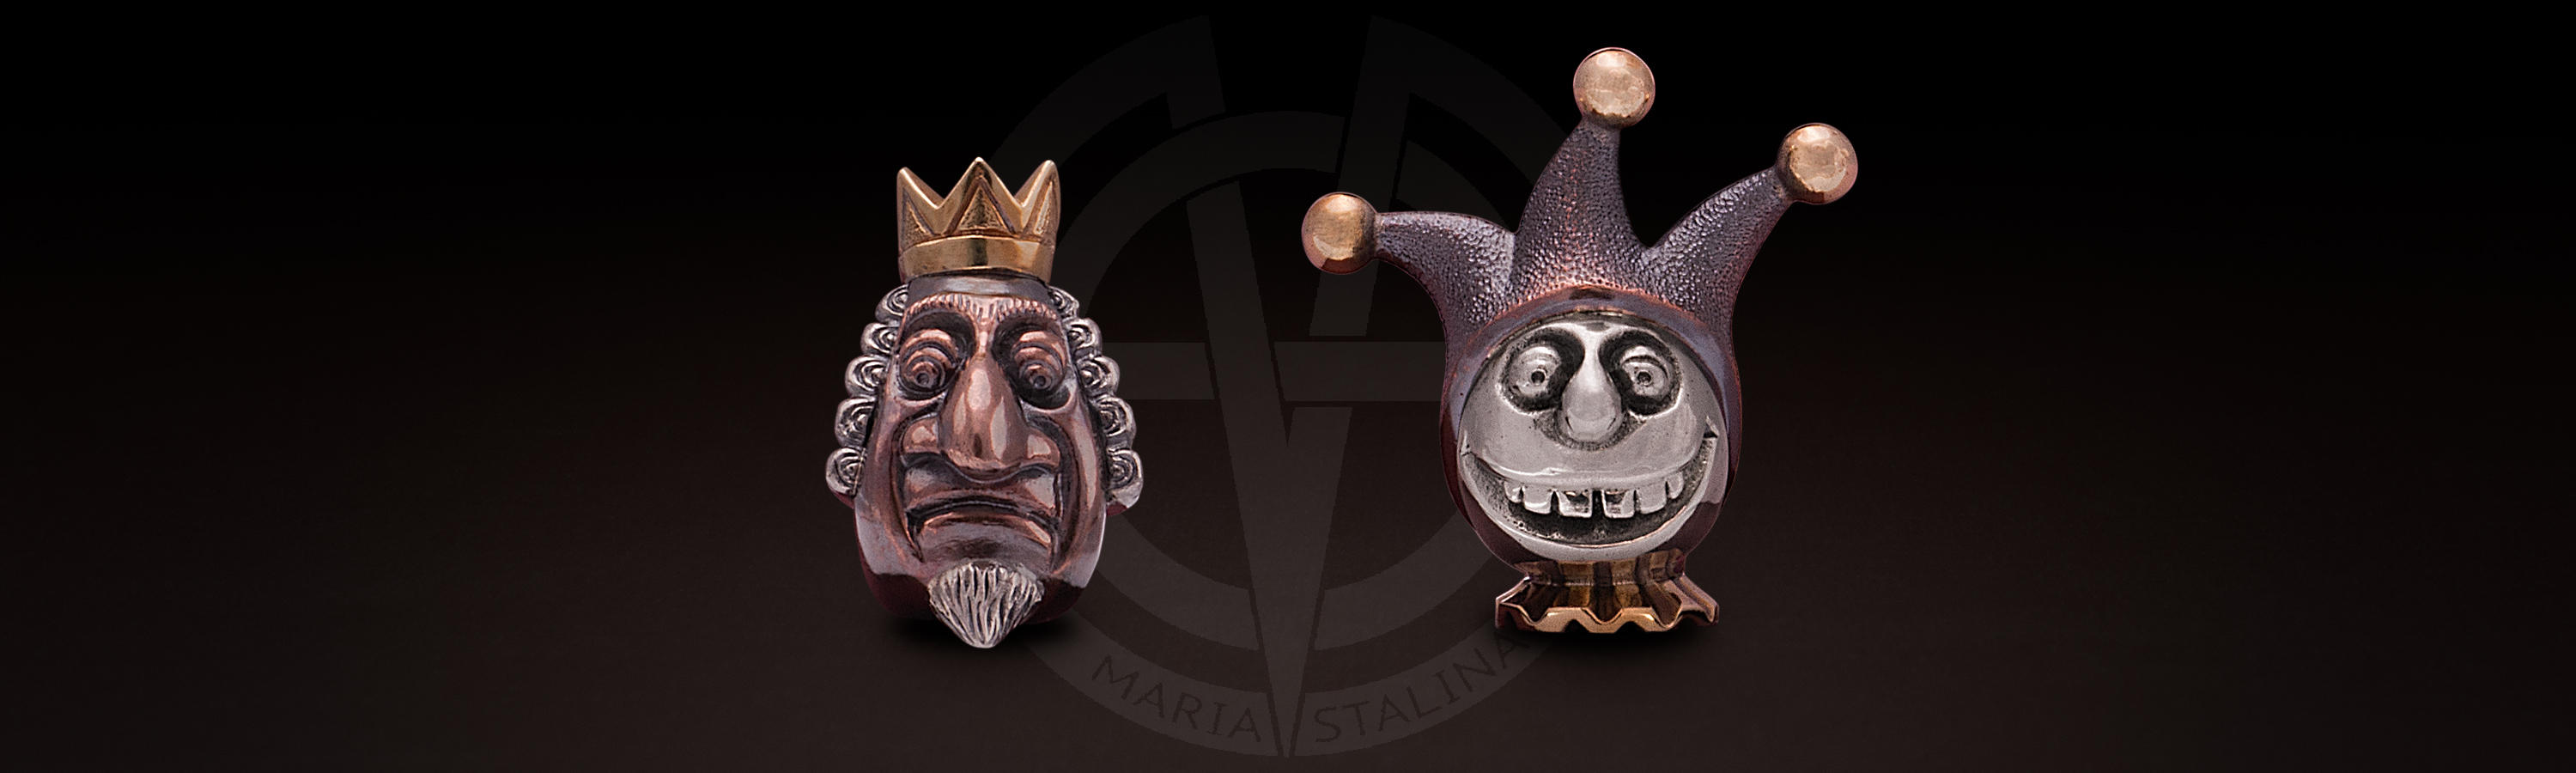 Lanyard beads The King and The Jester for a knife